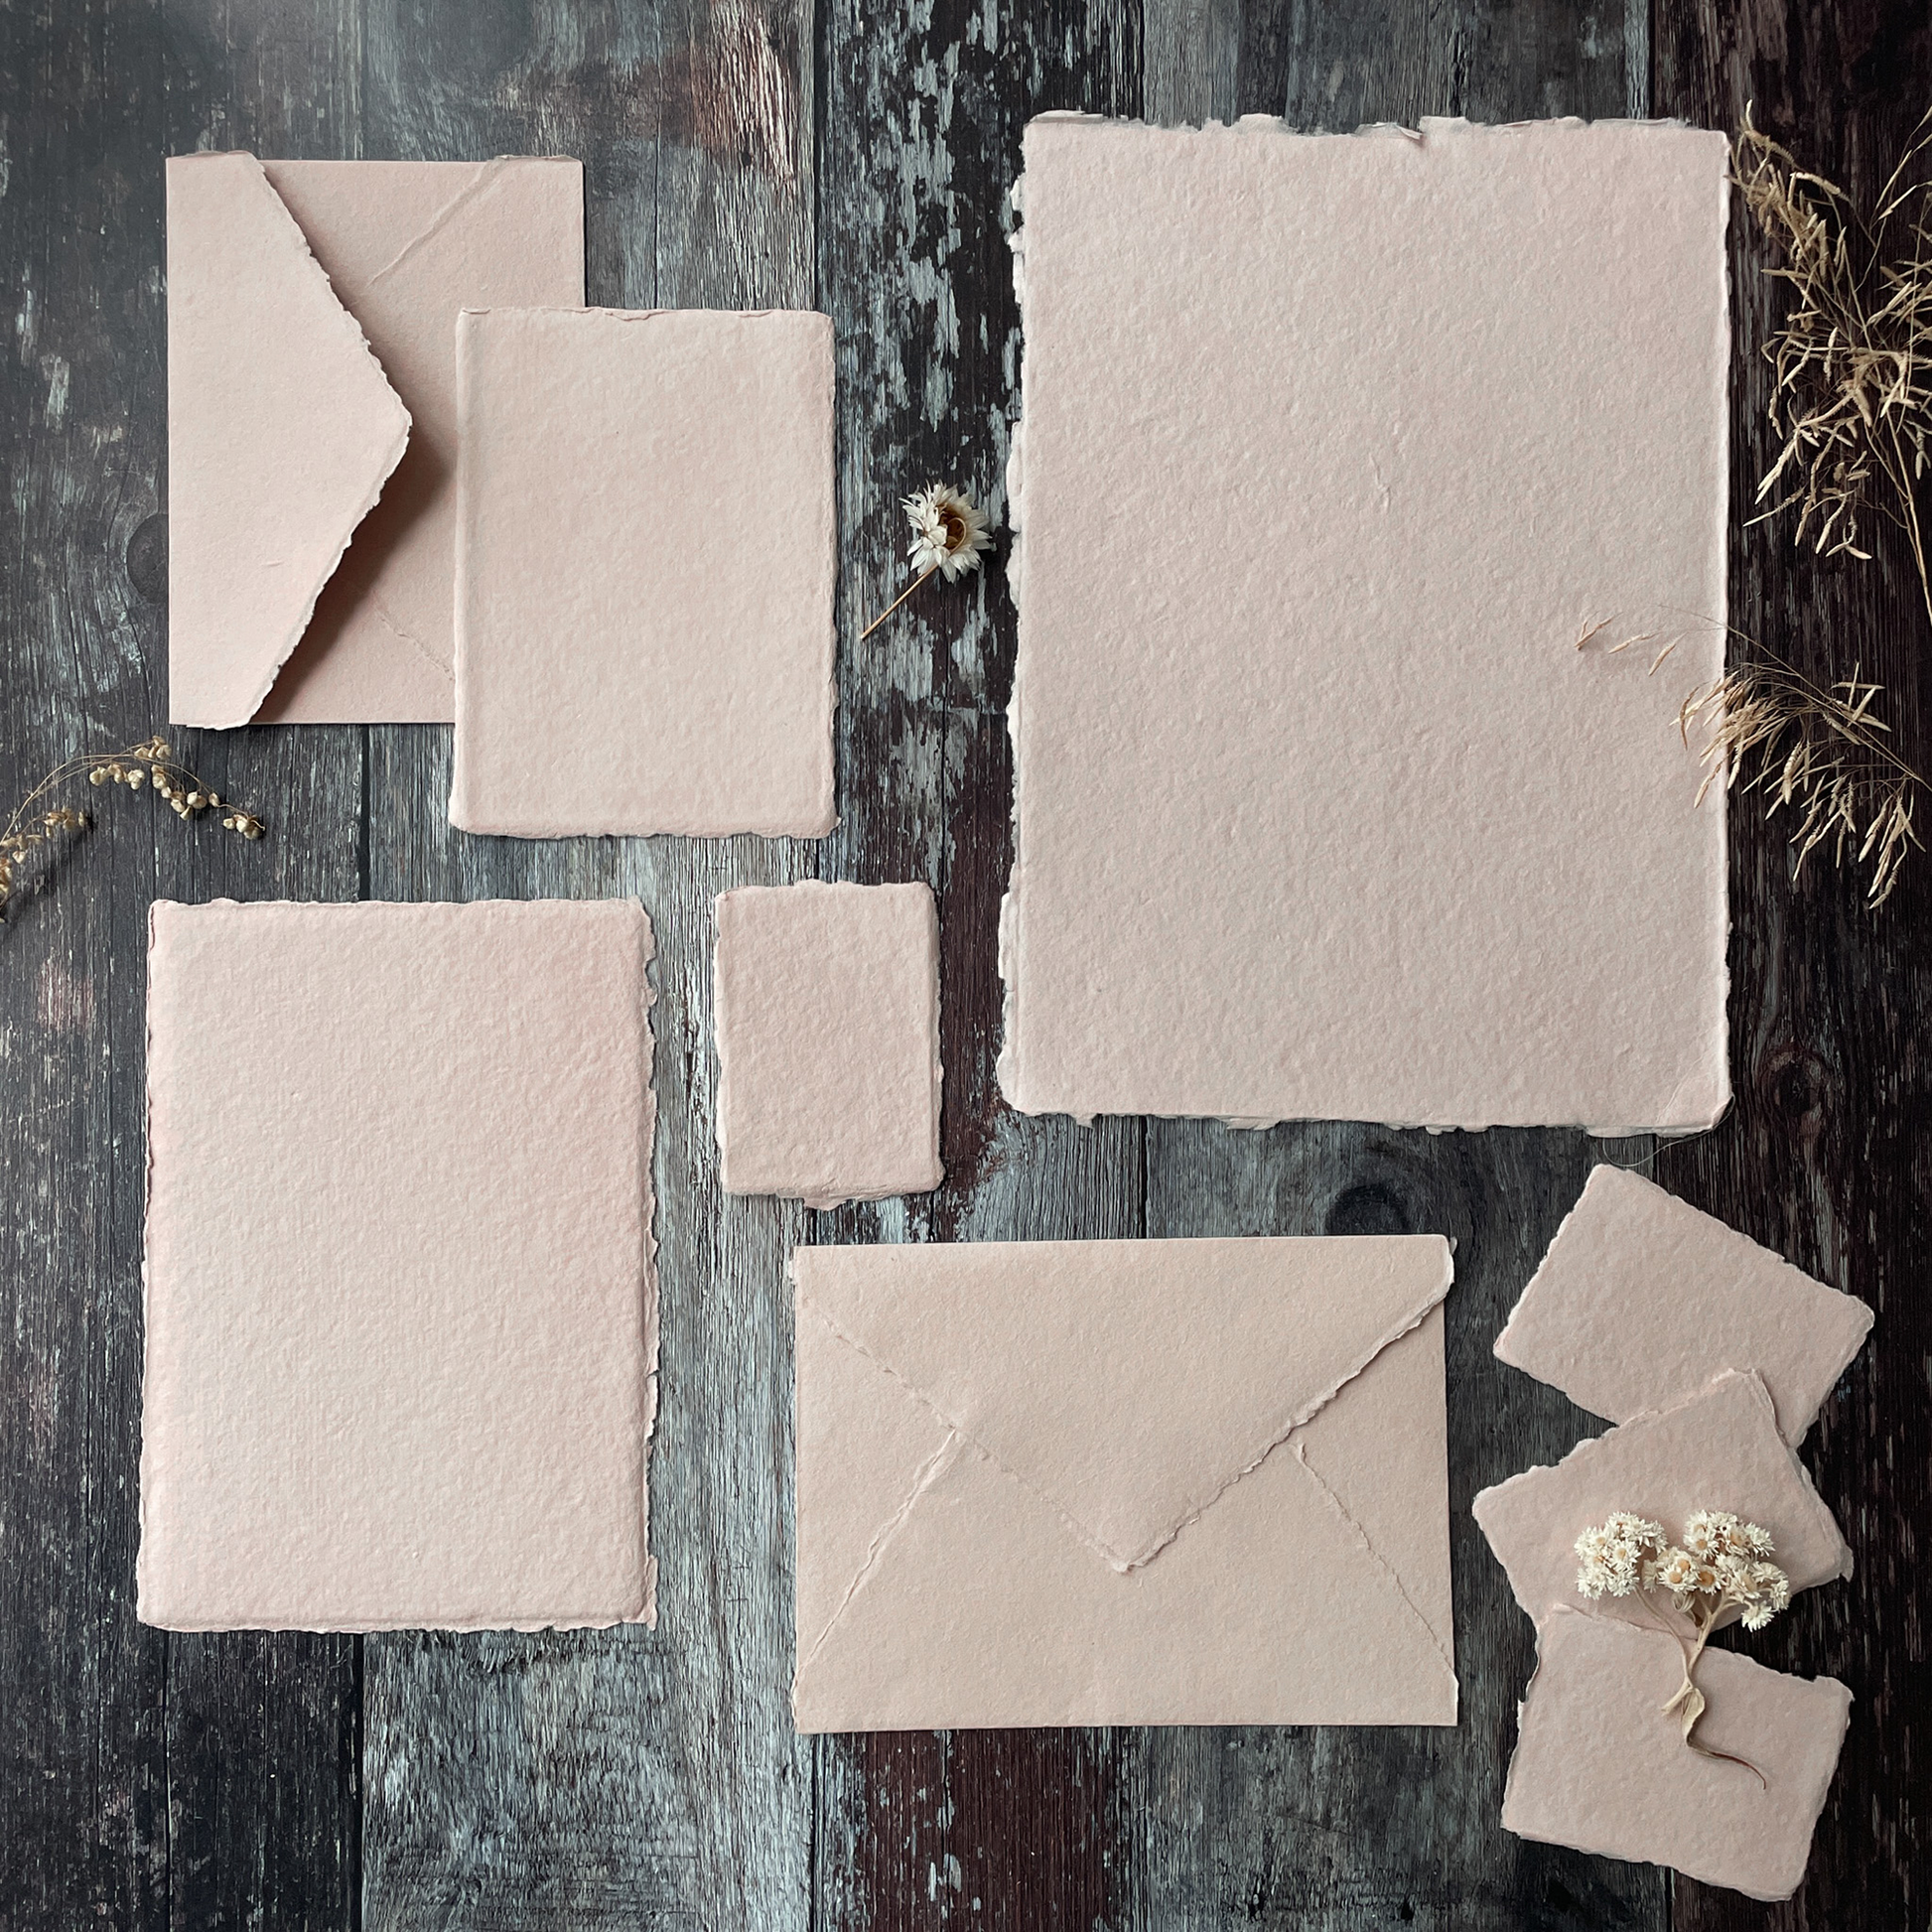 Wedding stationery blush deckle edge handmade recycled cotton paper. —  Feathers and Stone